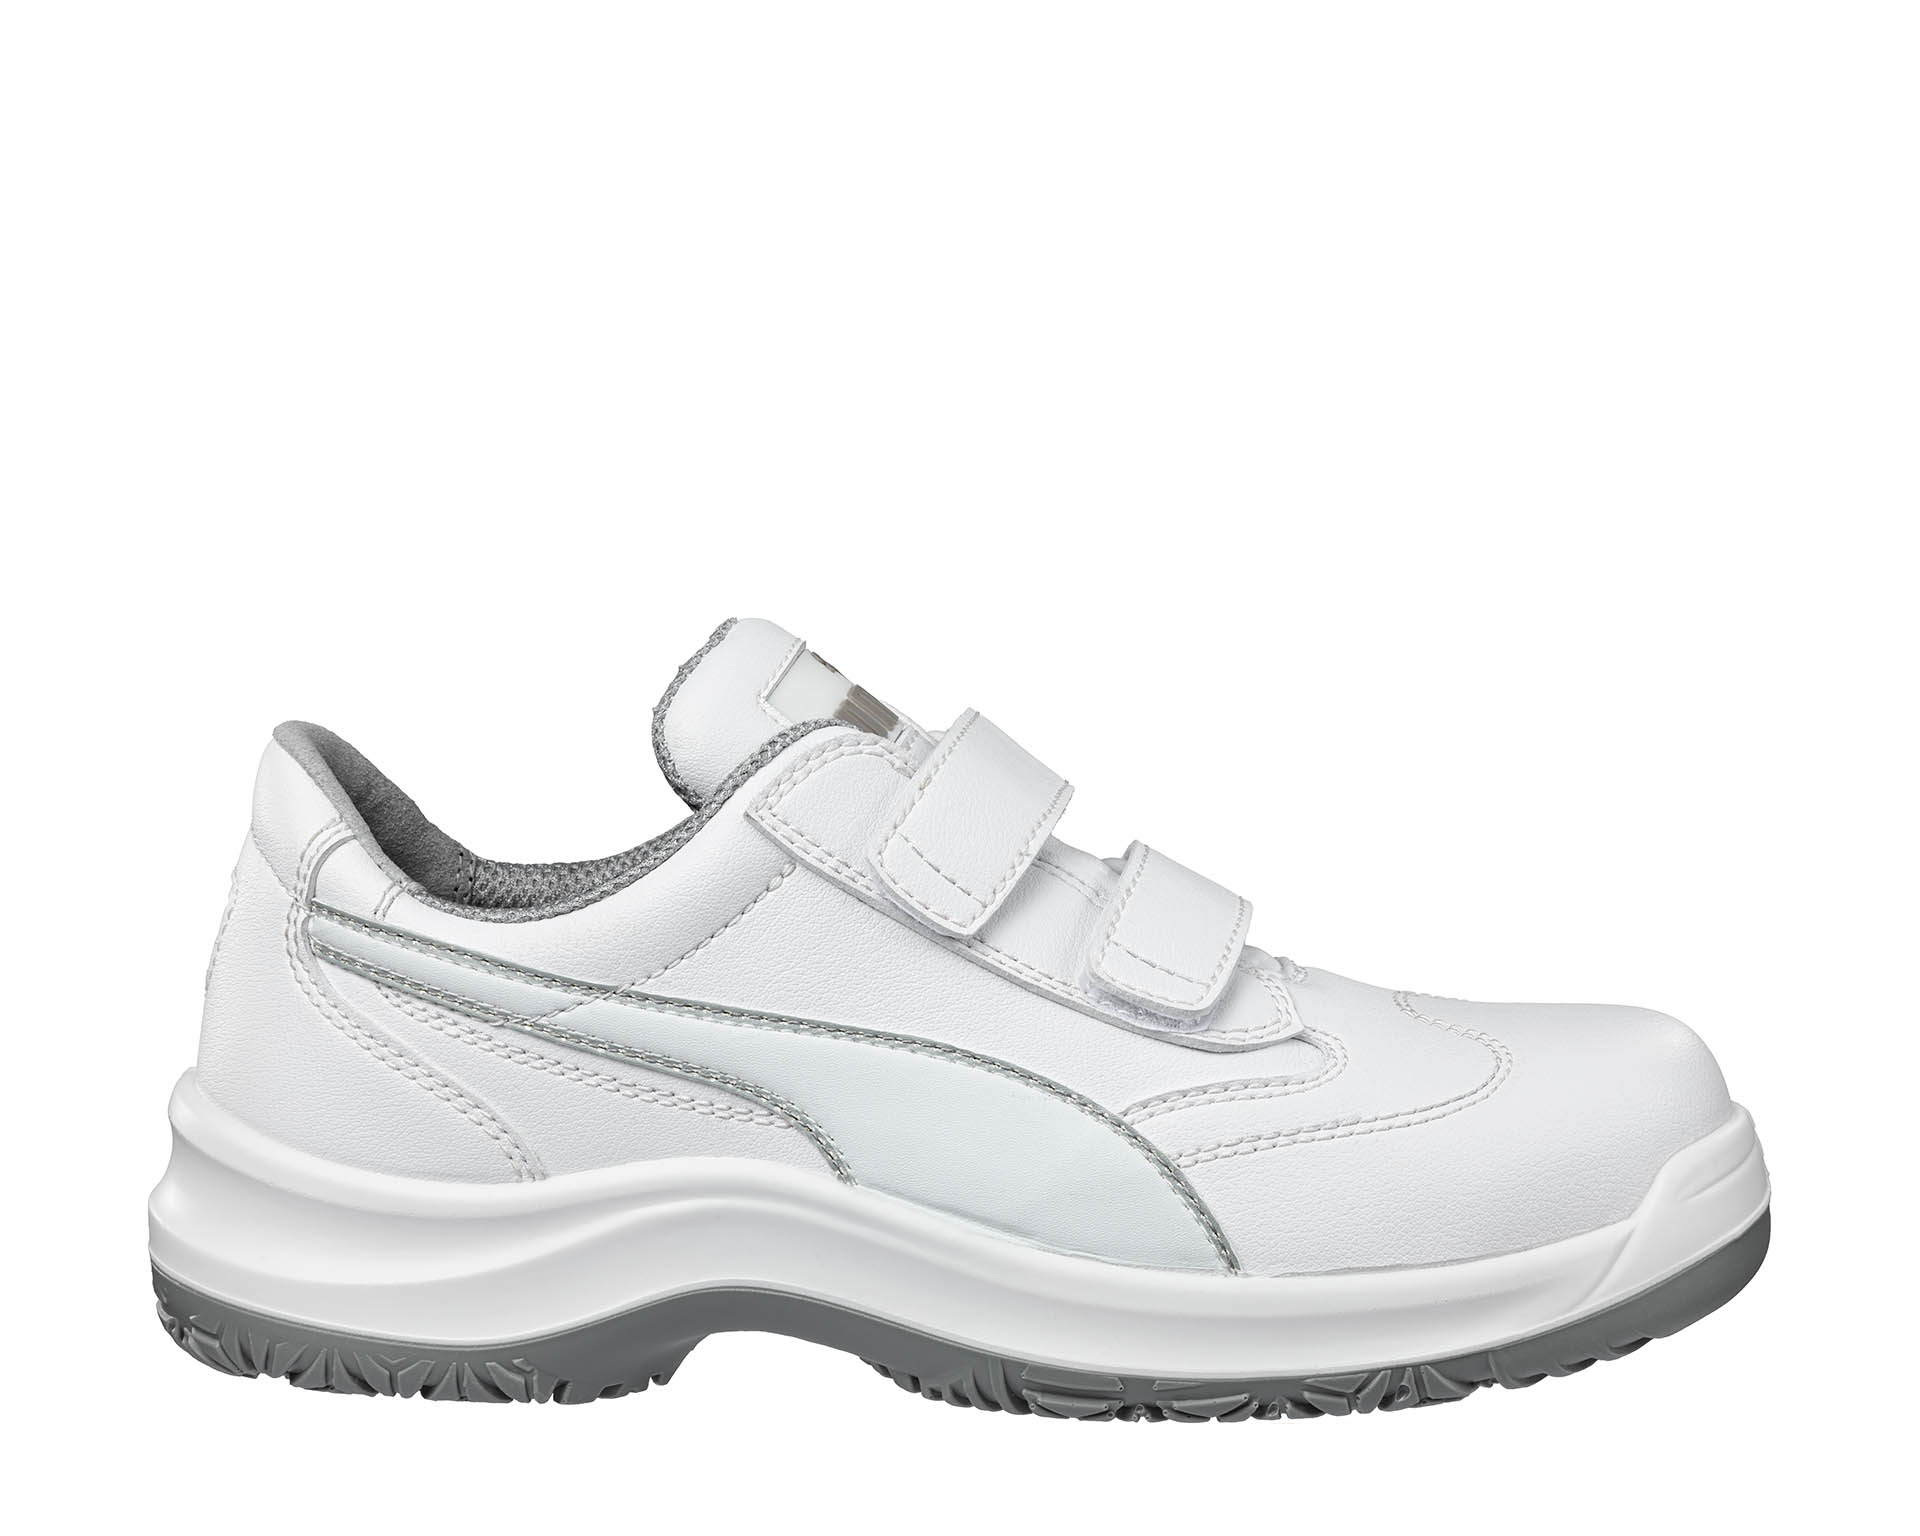 PUMA SAFETY safety shoes S2 SRC ABSOLUTE LOW | Puma Safety English